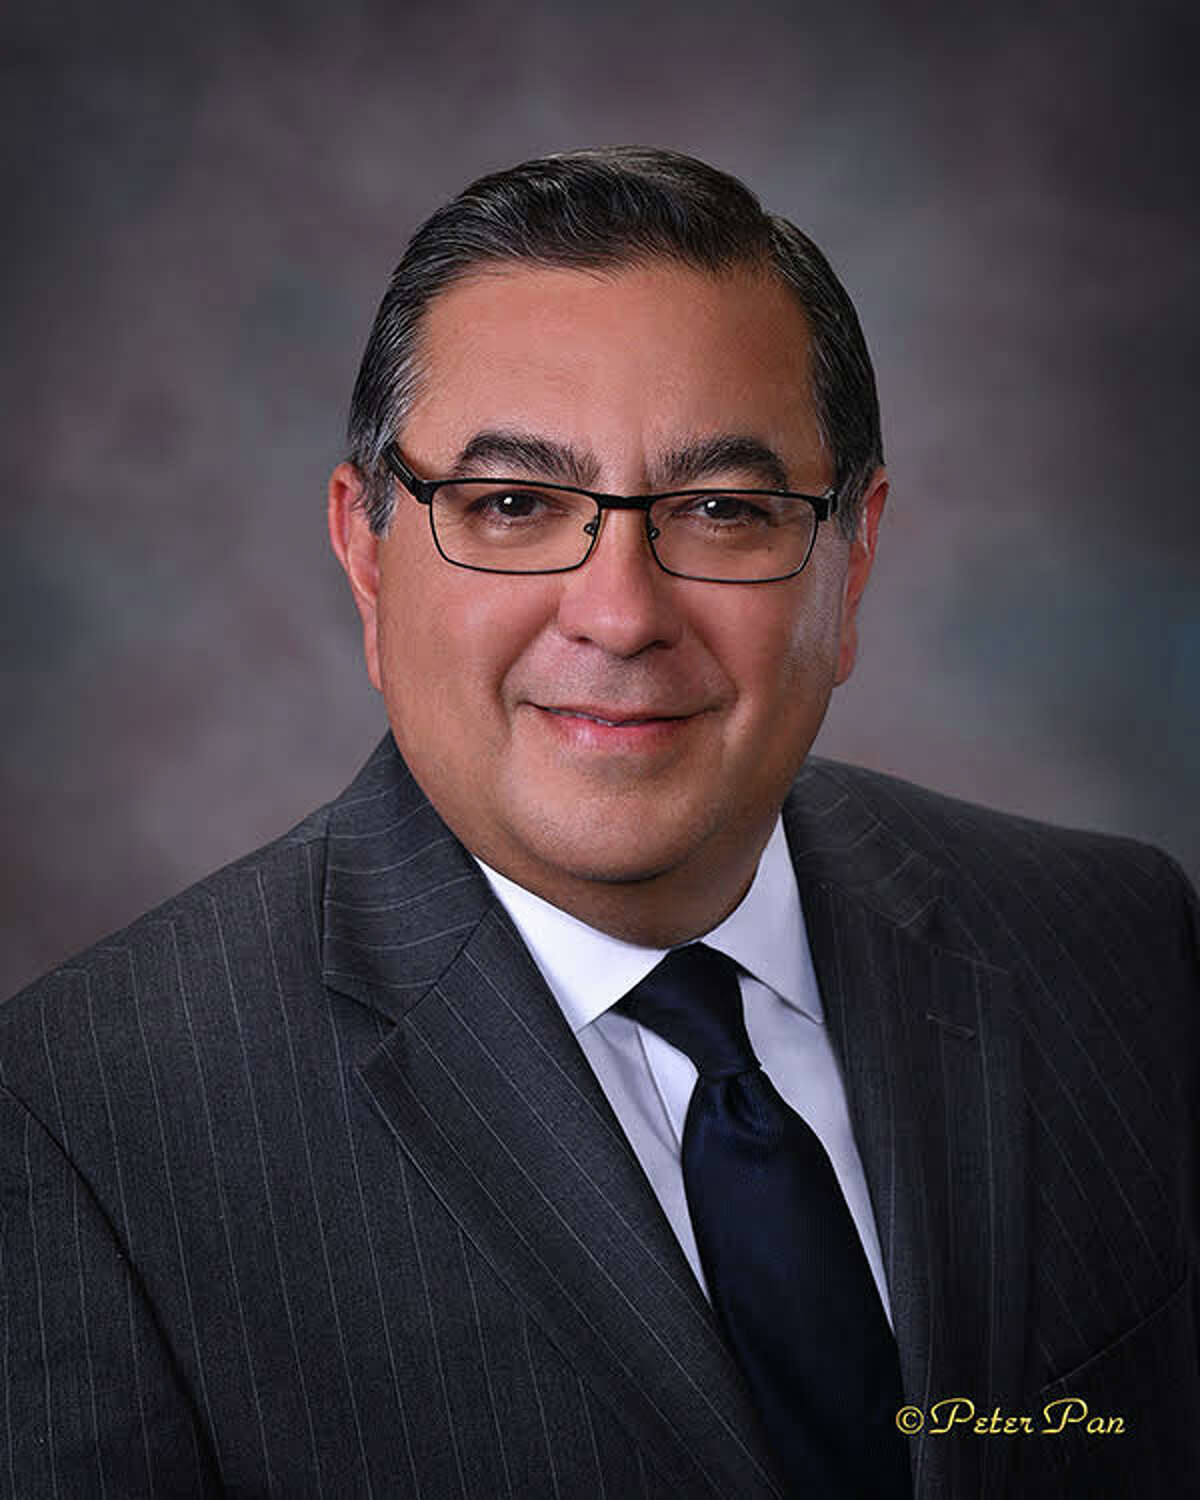 Federico Valle will begin serving the Diocese of Laredo as their superintendent Monday